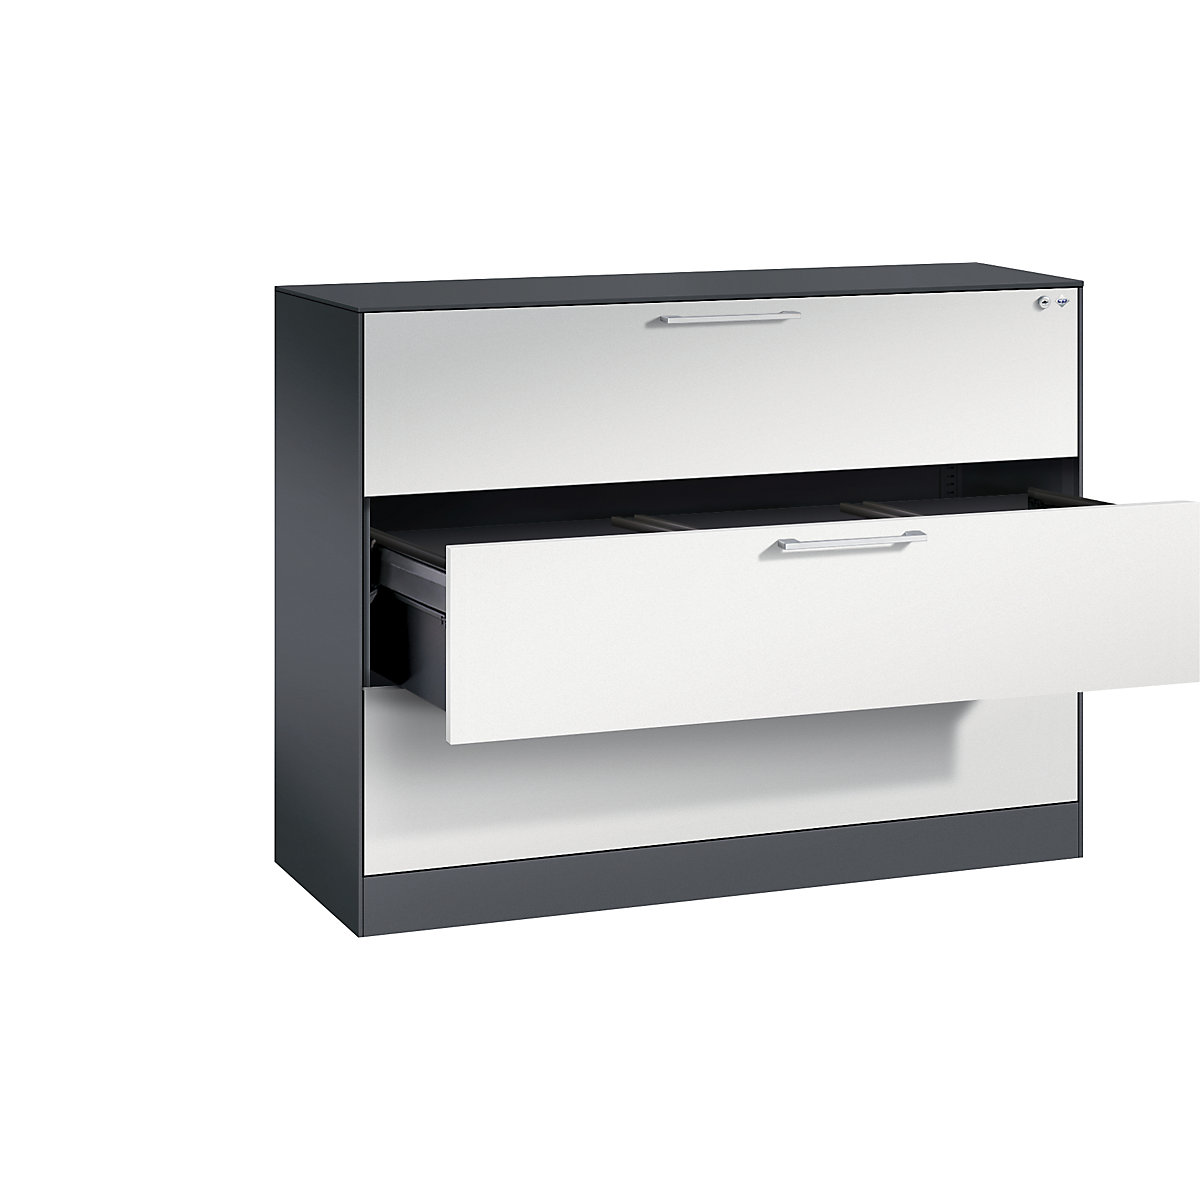 ASISTO suspension filing cabinet – C+P, width 1200 mm, with 3 drawers, black grey/light grey-8